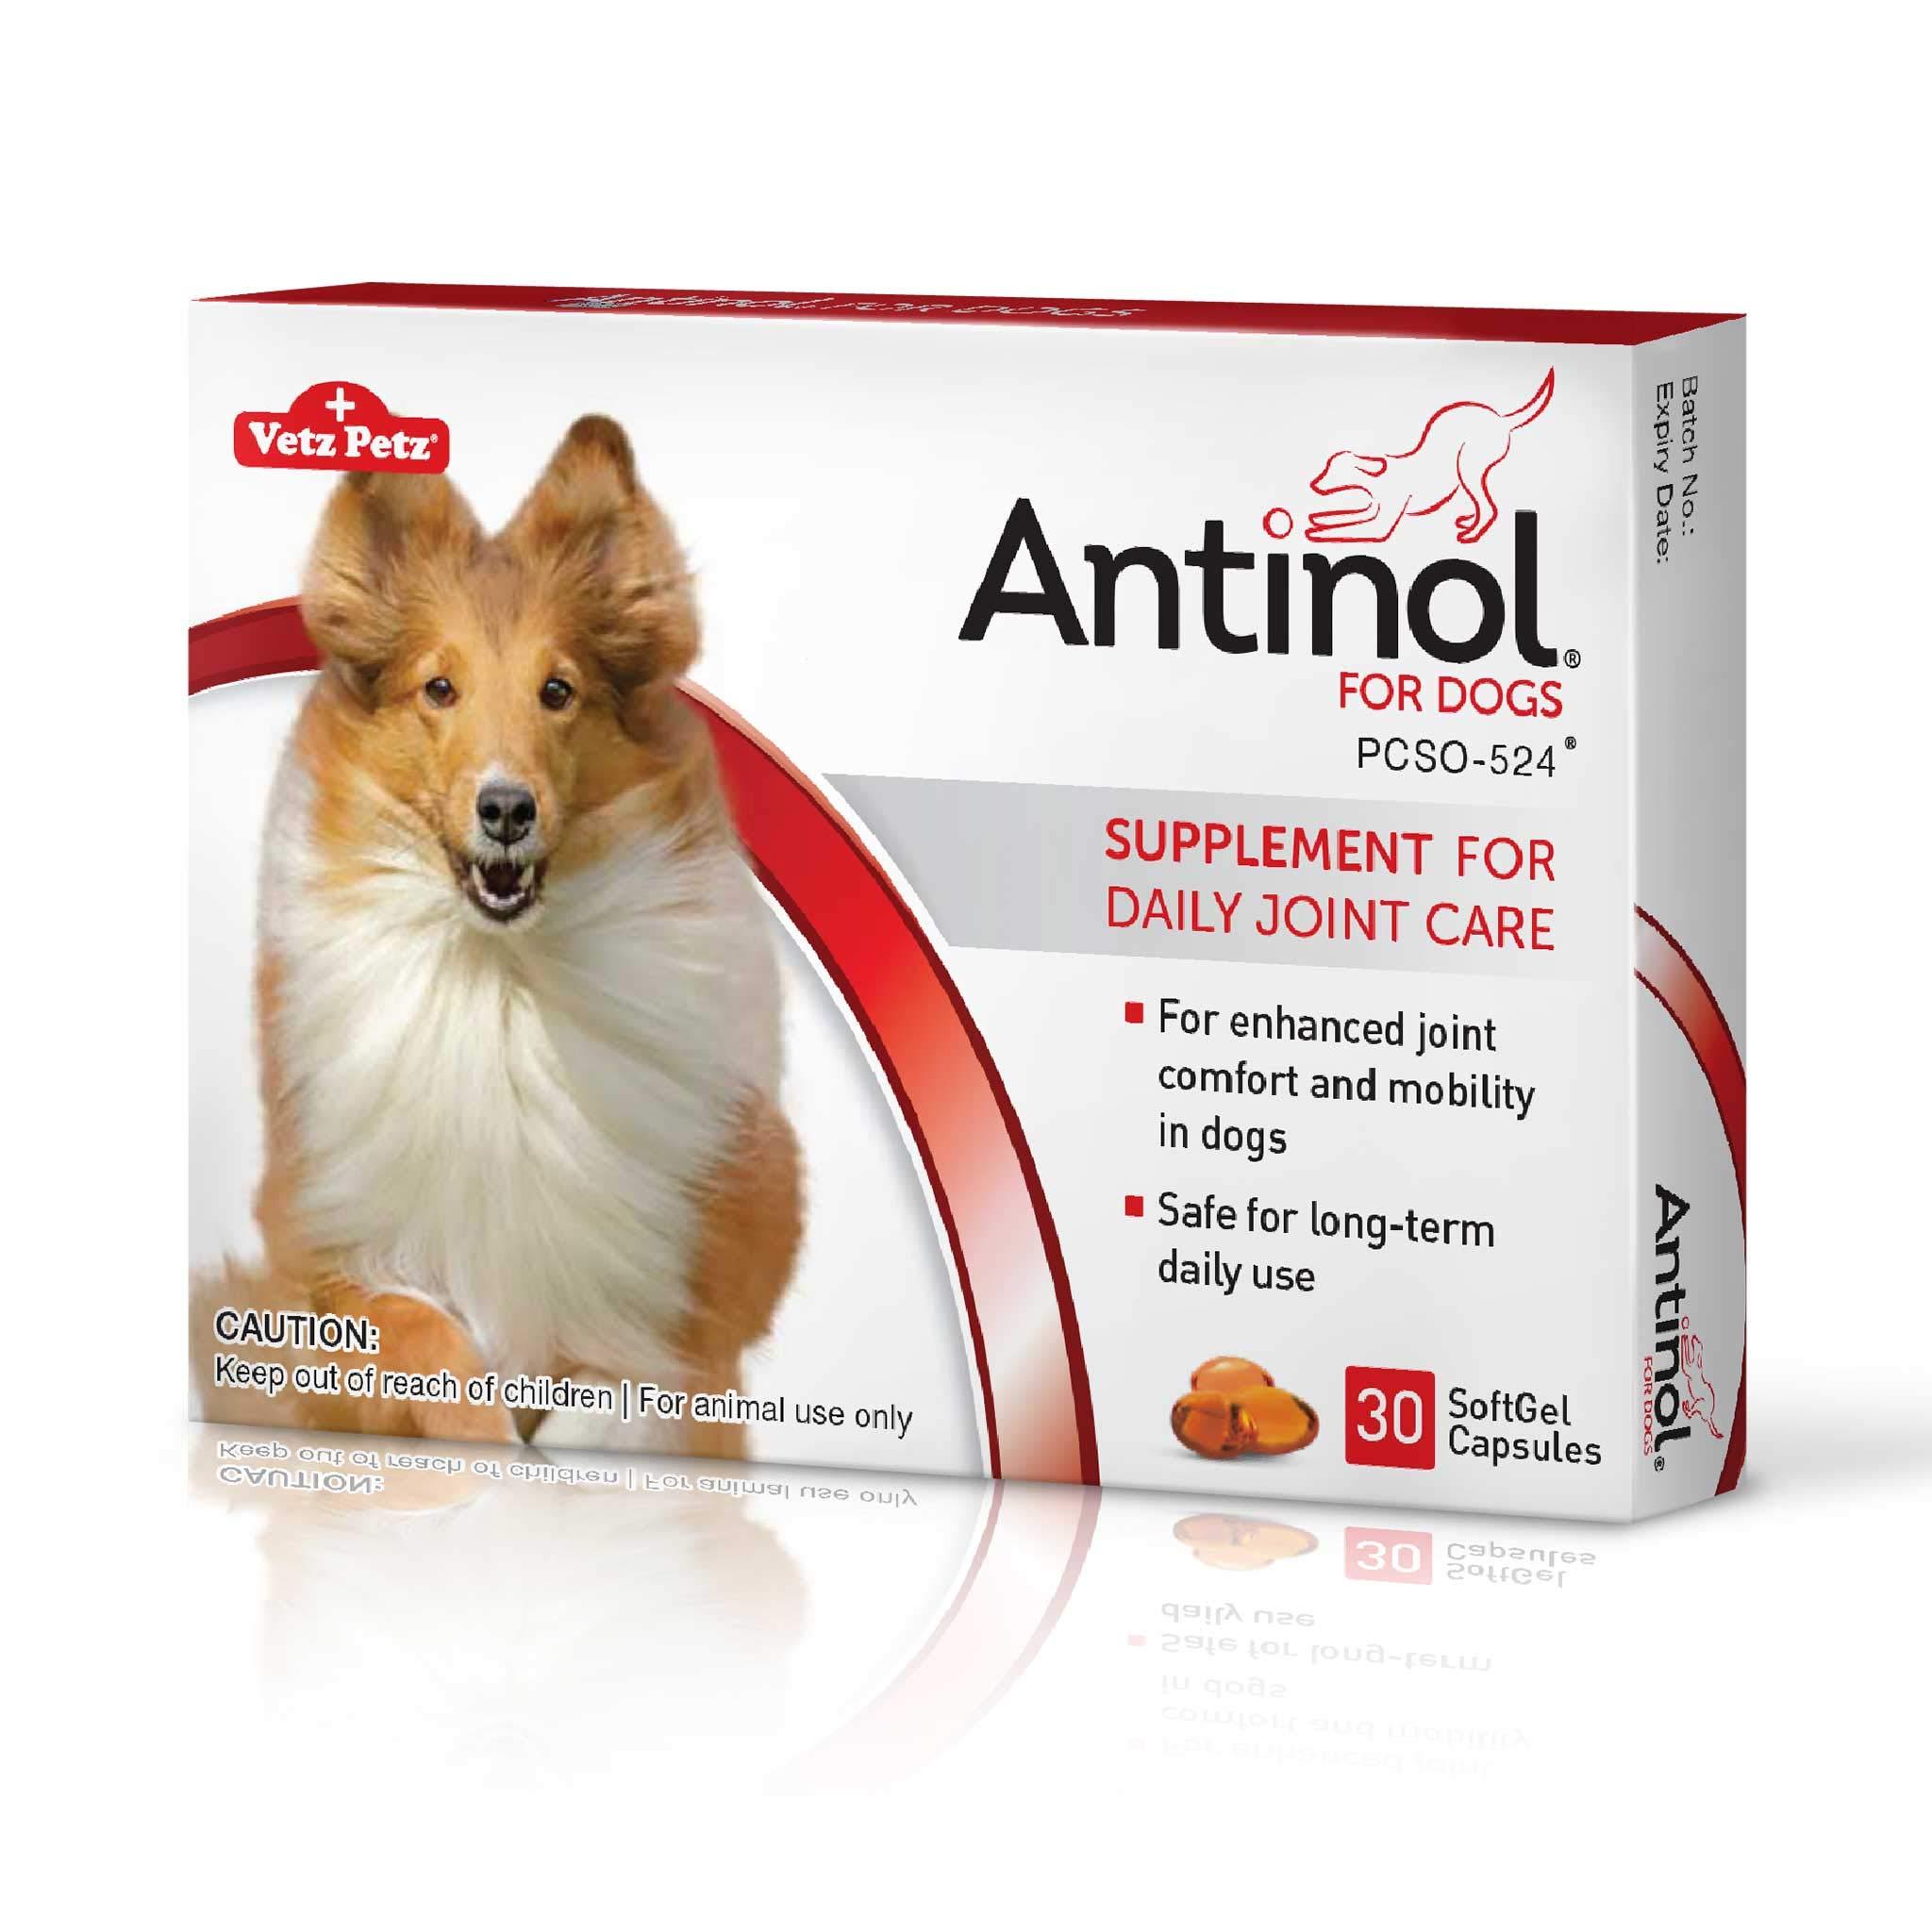 Antinol?30 Softgels - The Natural Super Potent Joint Supplement for Dogs